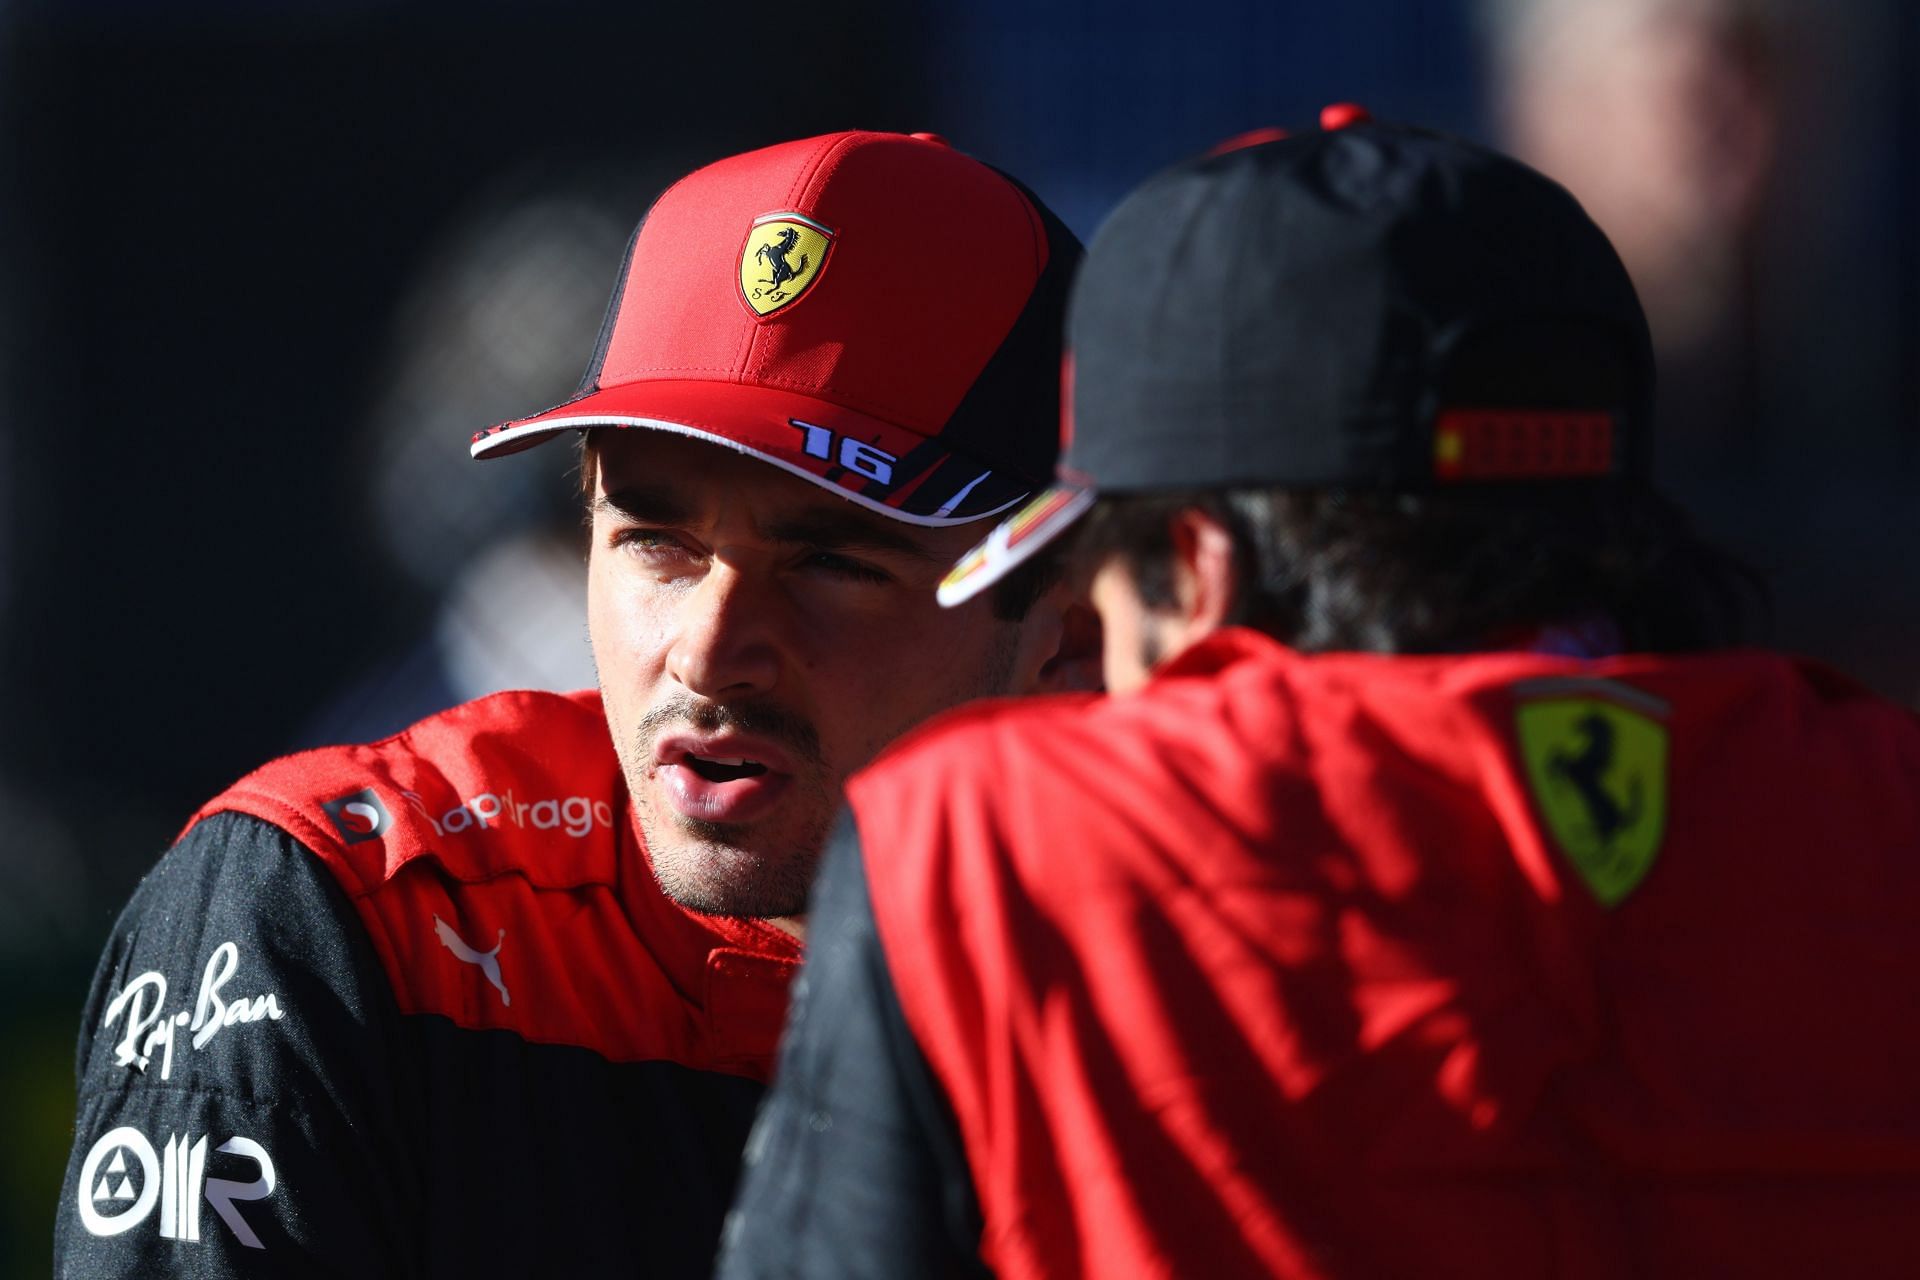 Charles Leclerc demonstrated his class over Carlos Sainz at the F1 Austrian GP.